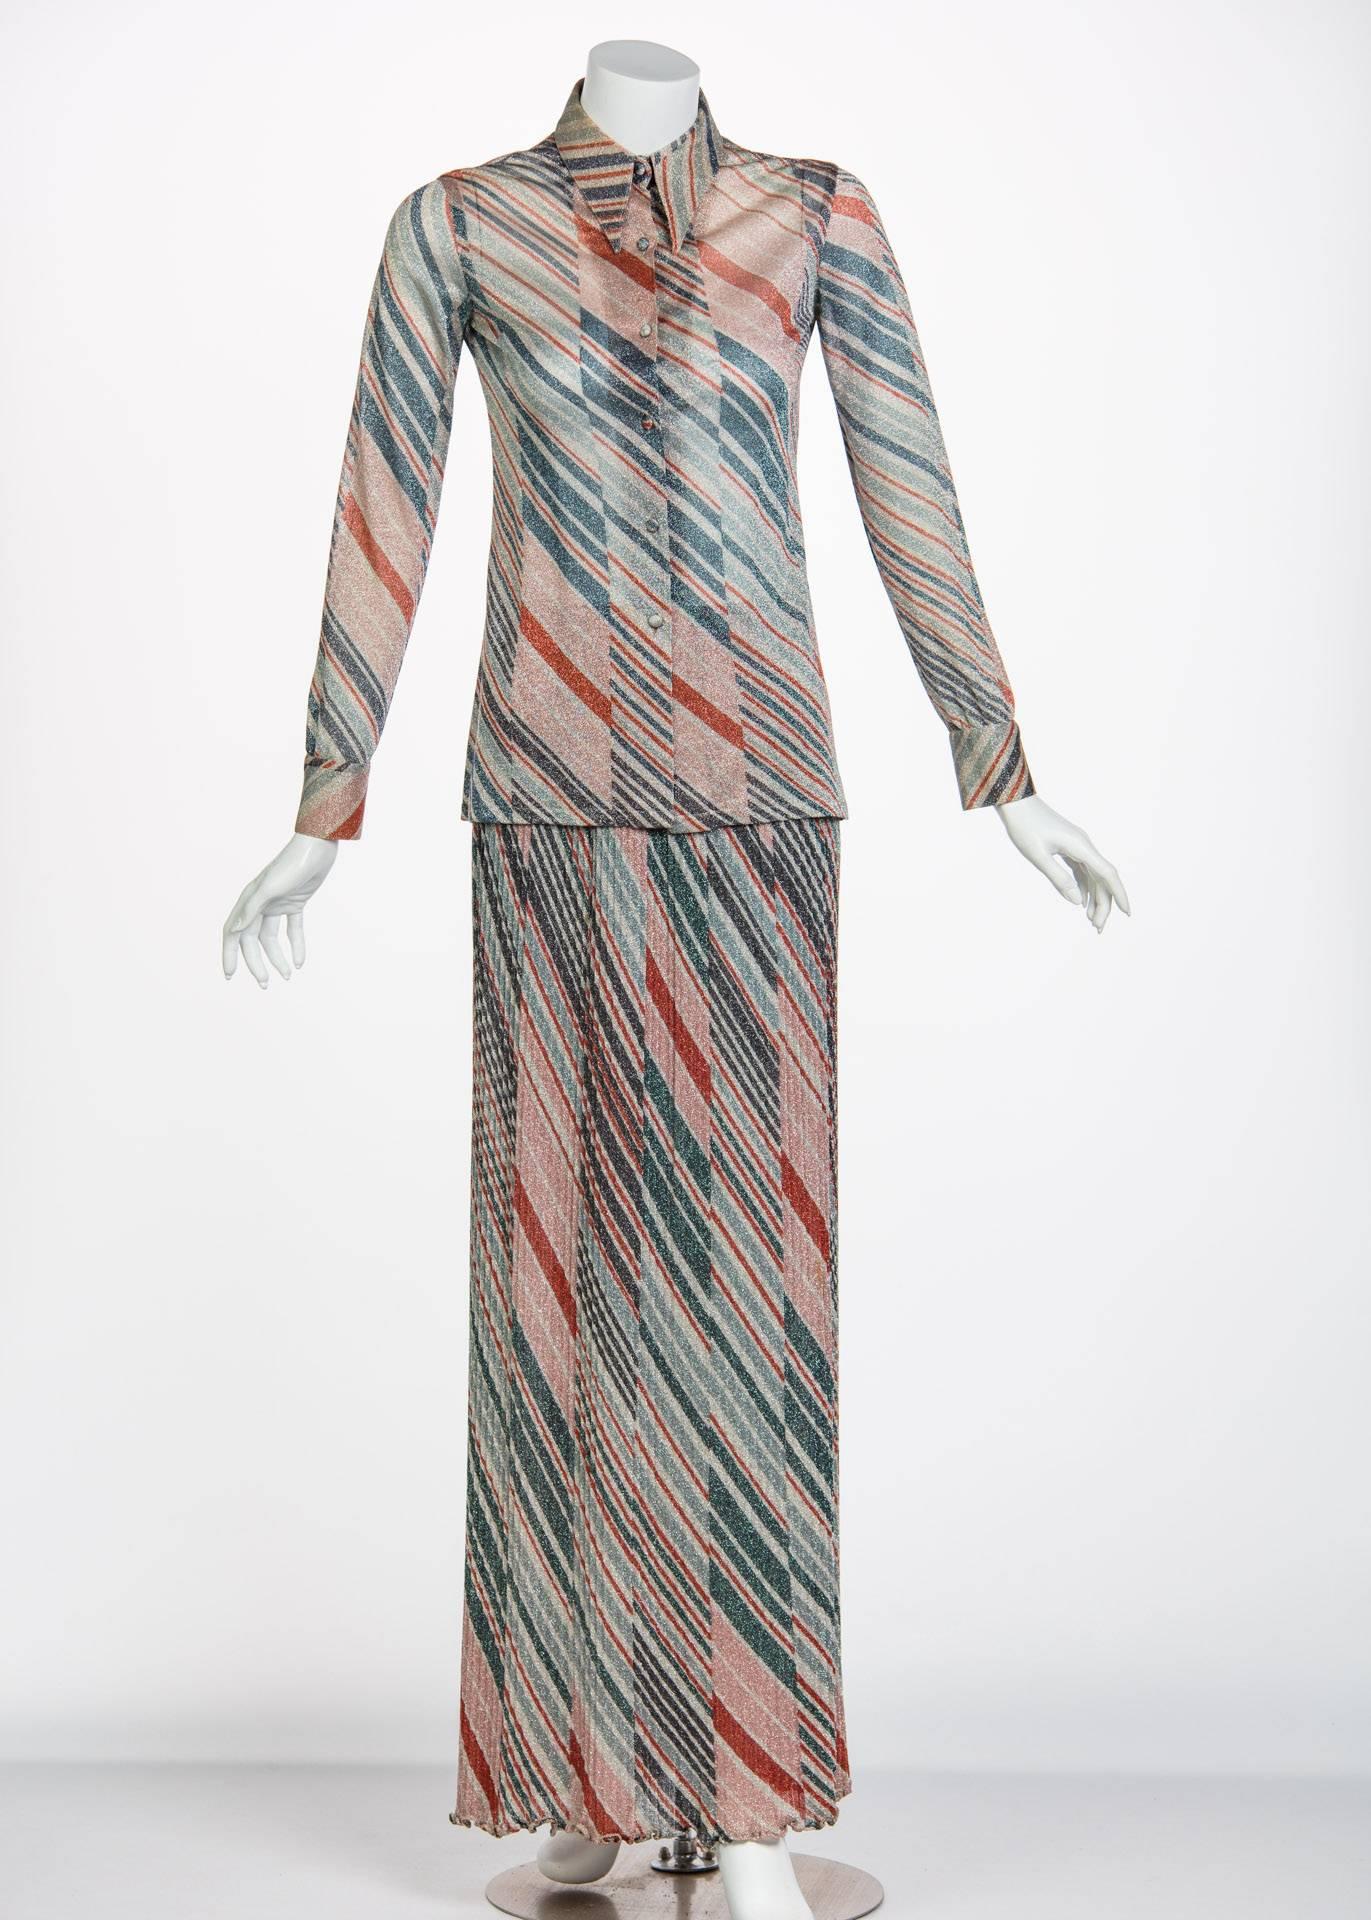 Originally founded in 1954 as a knitwear house, Ottavio and Rosita Missoni quickly rose to success in the international fashion sphere with their signature sheer lamé textiles that emphasized the delicately balanced colors. For Missoni, it is all